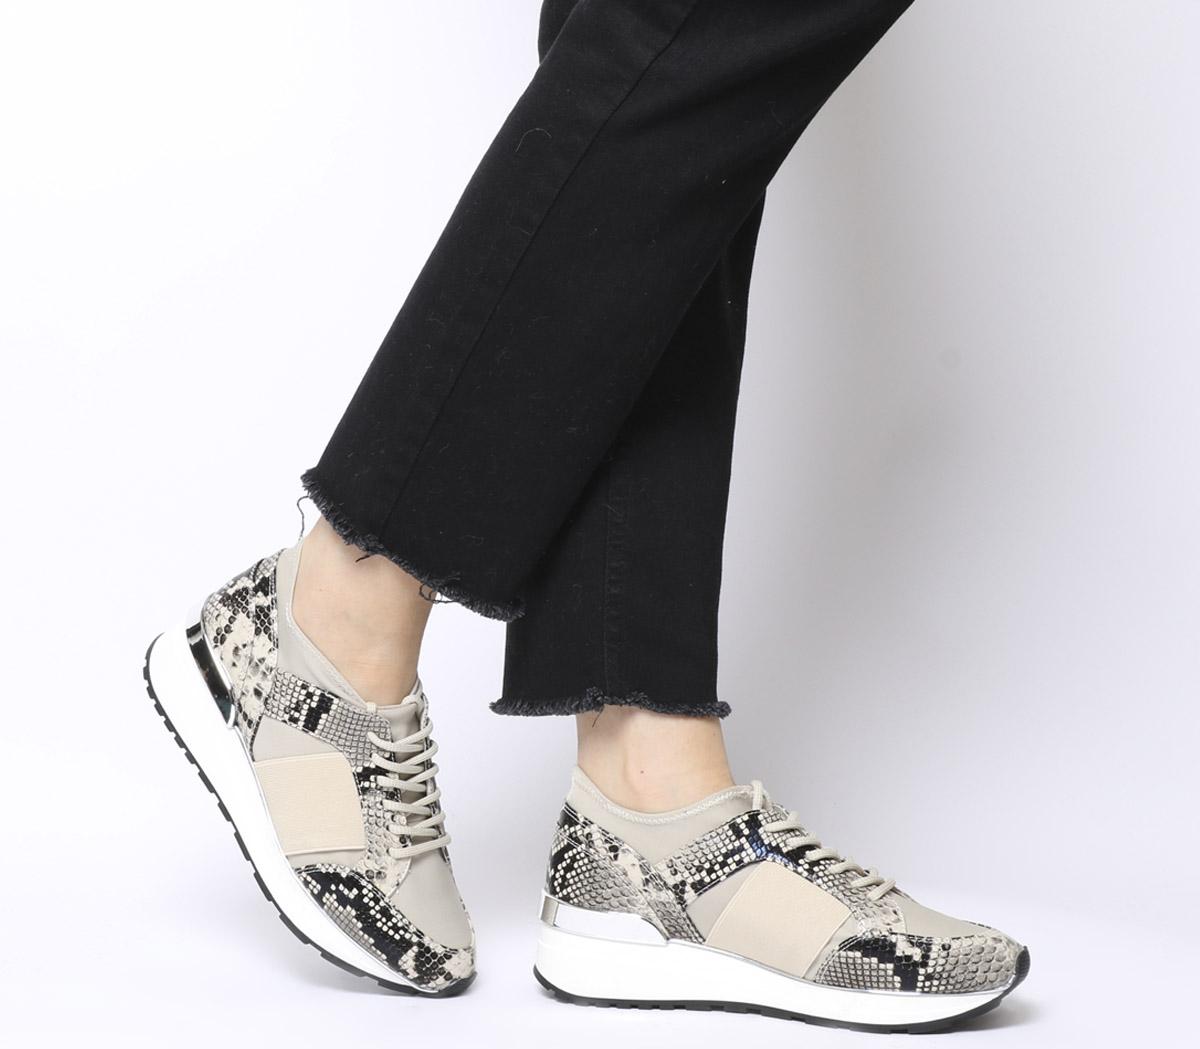 OFFICEFella Glam Lace Up Runner TrainersNude Snake